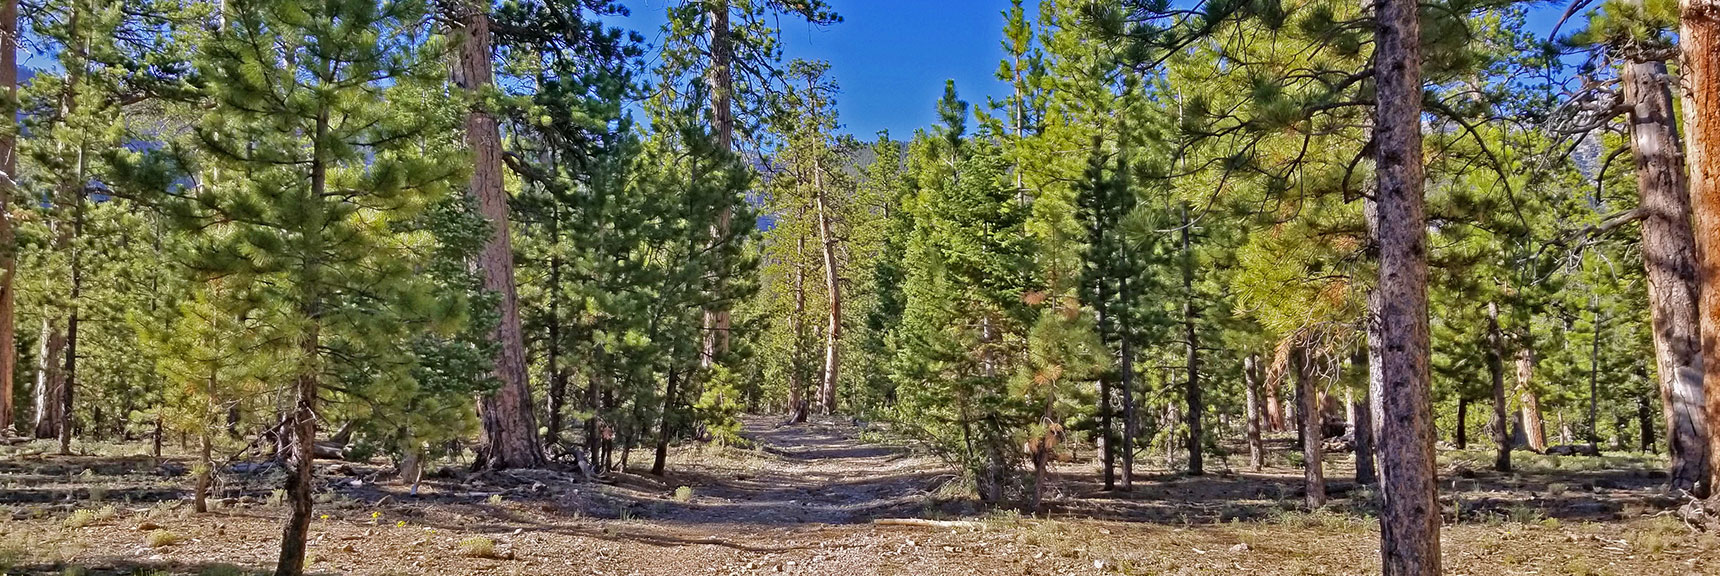 Old Rarely Used Road at Top of Rise Guides First 1/2th Mile | Lee to Kyle Canyon | Gradual Mid Ridge Approach | Mt. Charleston Wilderness | Spring Mountains, Nevada